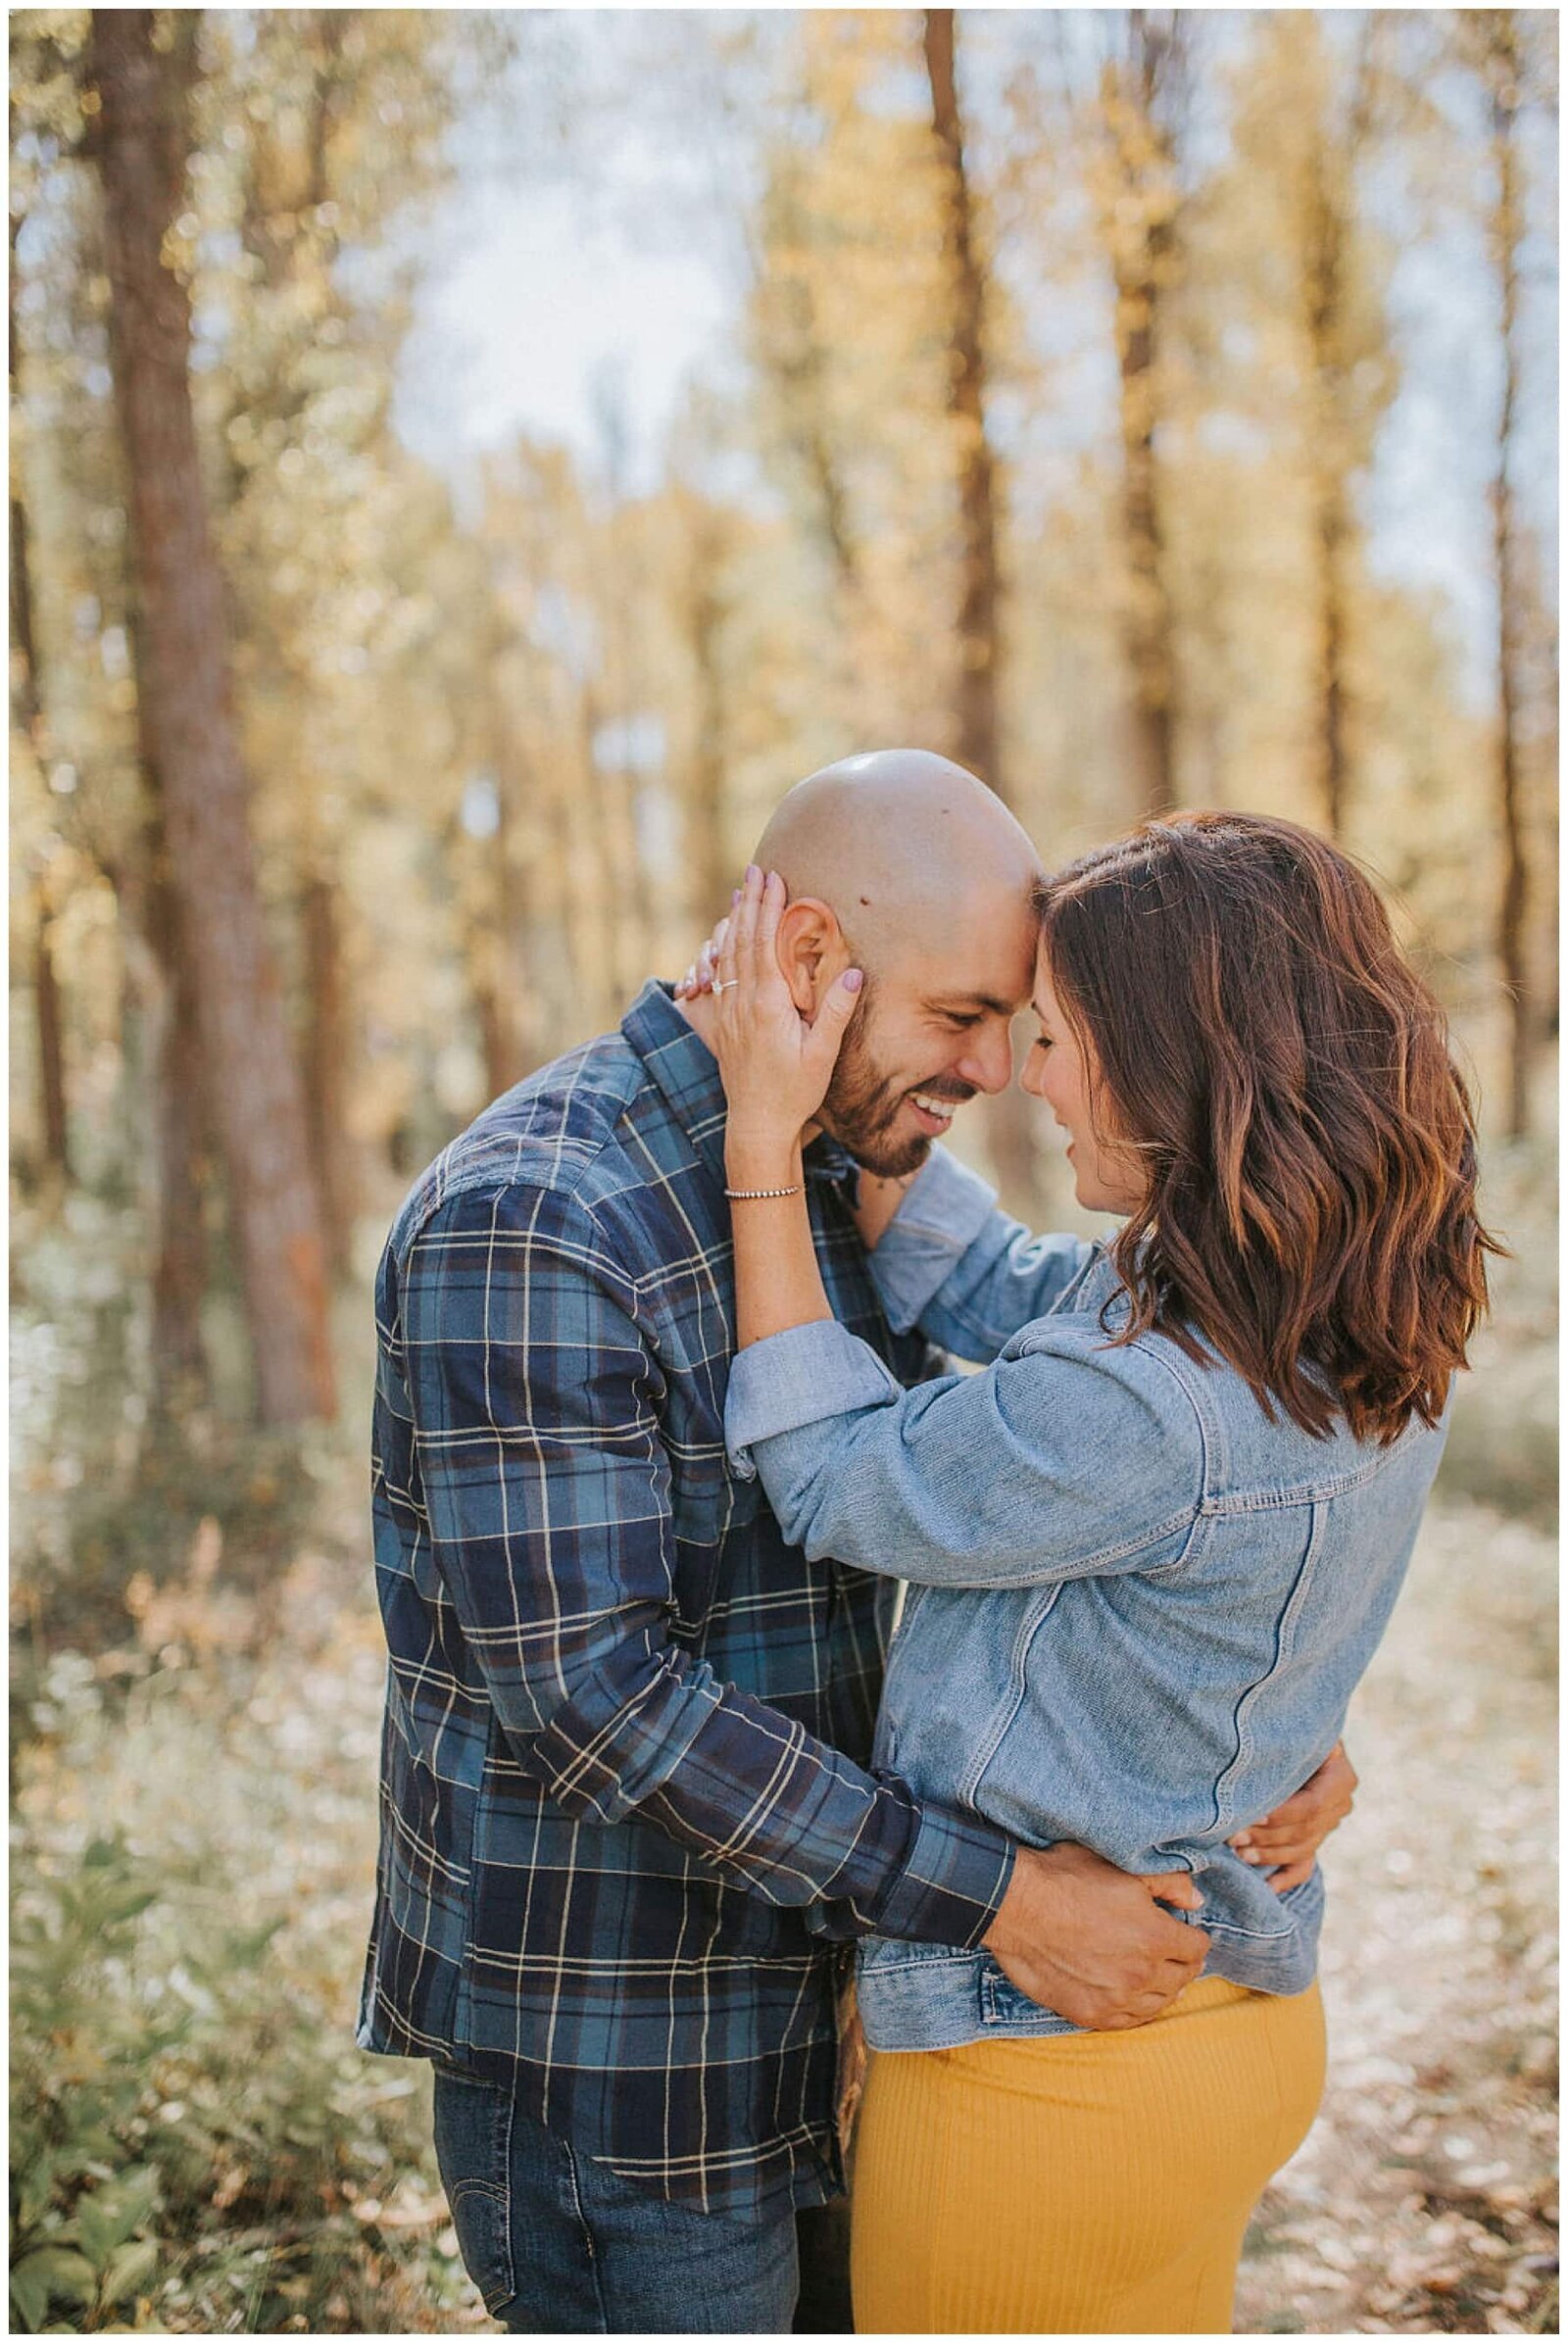 Lake Tahoe wedding photographer captures couple hugging during forest engagements